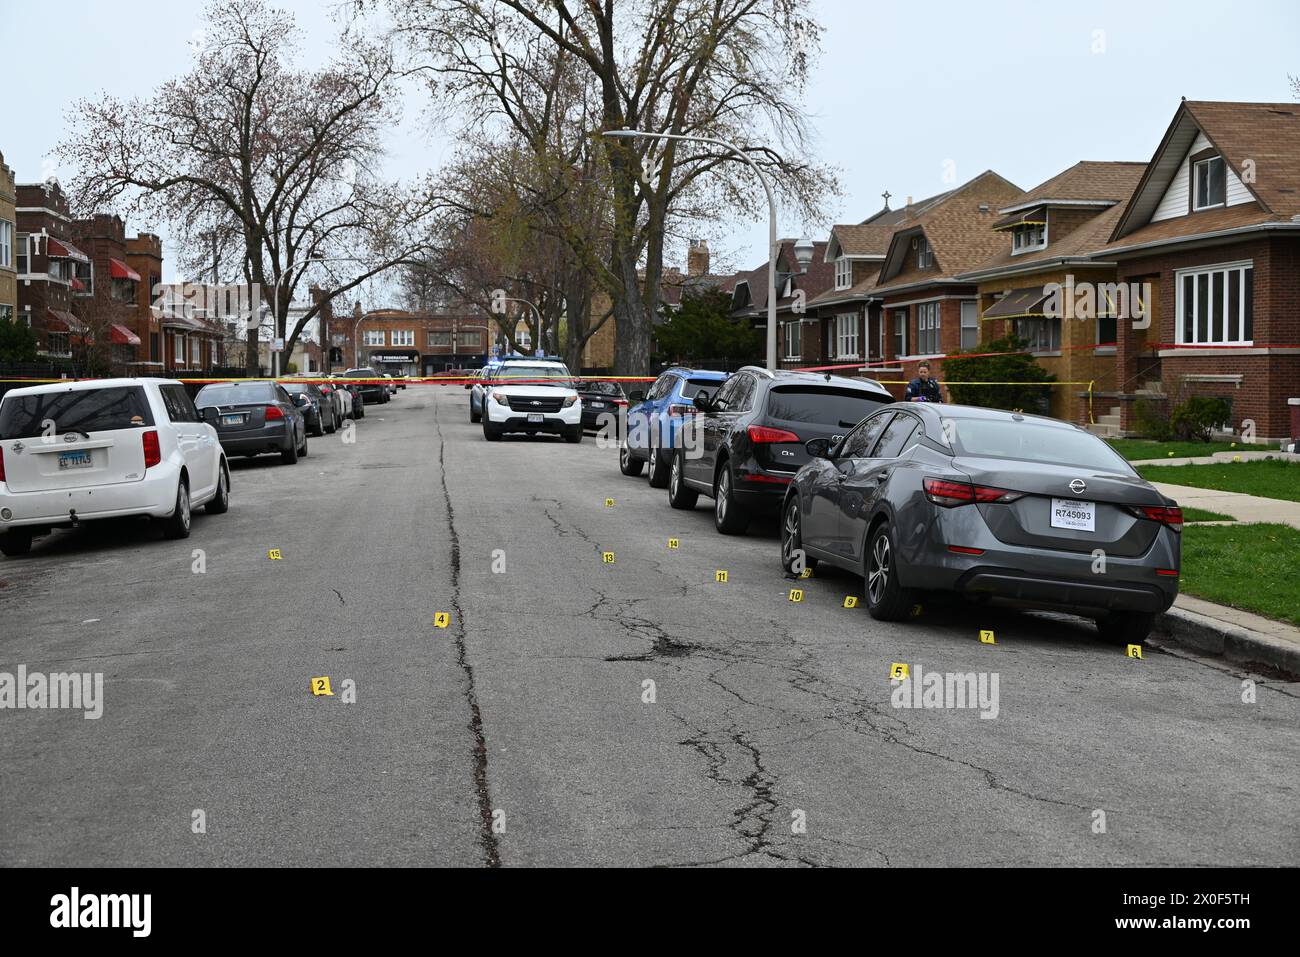 Shell casings discovered at the crime scene and marked by several evidence markers. 20-year-old male shot by another person and taken into custody by police in Chicago, Illinois, United States on April 11, 2024. Thursday afternoon at approximately 2:17 p.m. in the 1500 block of N. Leclaire Avenue, a 20-year-old male victim was discovered to have sustained one gunshot wound to his right leg after being involved in an exchange of gunfire with an unknown individual. The victim was transported to the hospital in good condition and the victim was placed in custody. Detectives are Investigating and Stock Photo